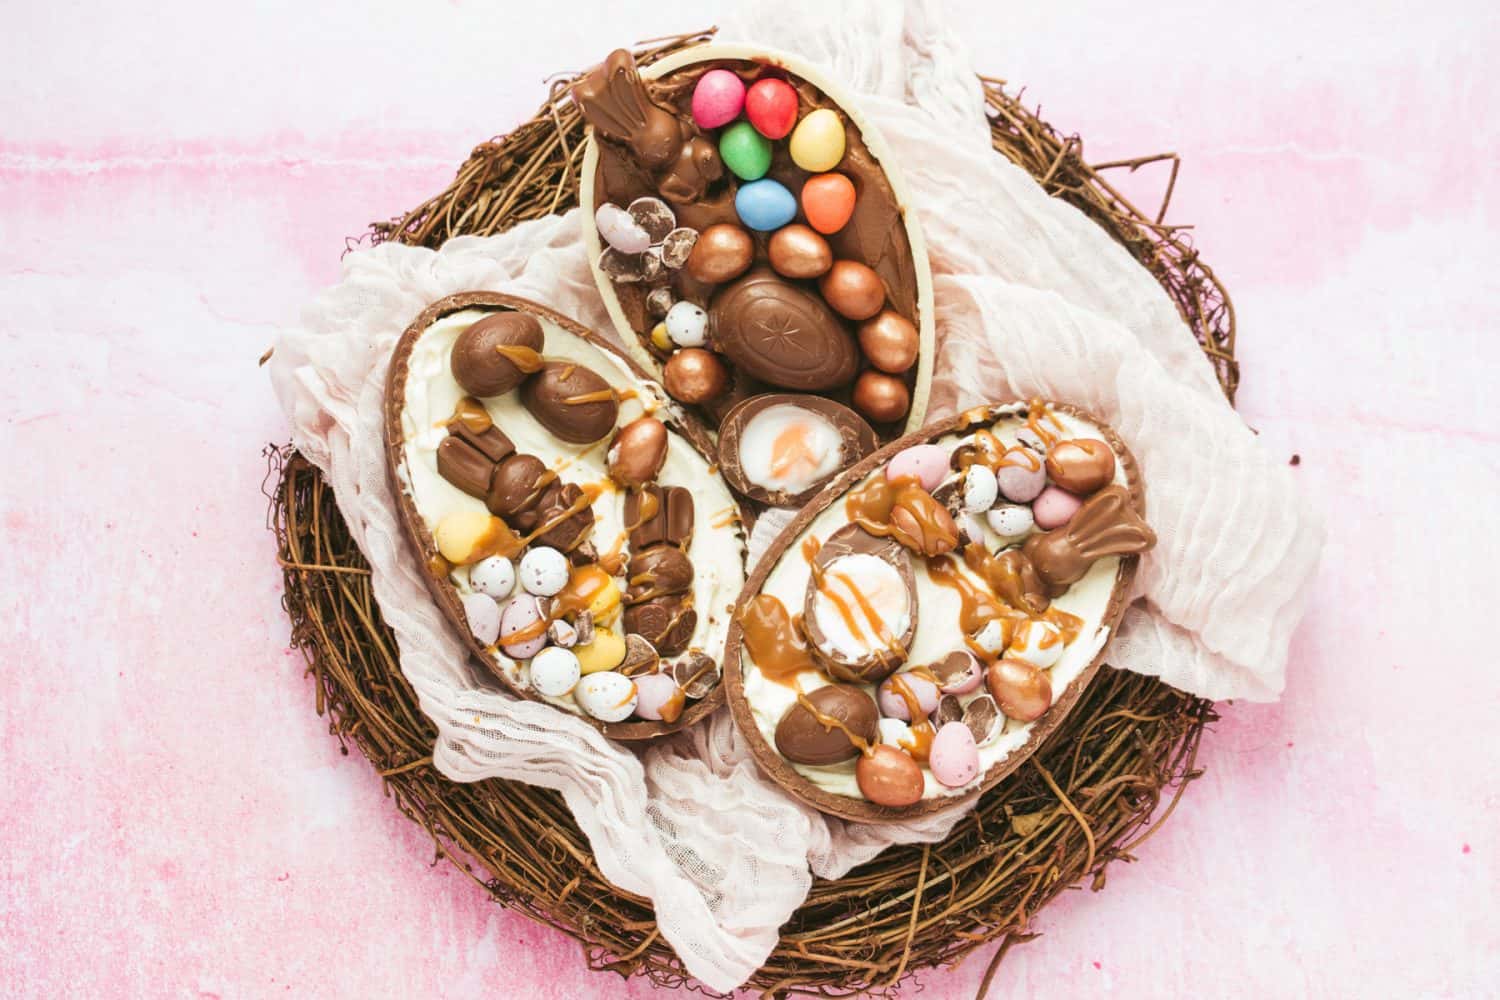 An Easter nest with 3 halves of chocolate Easter eggs on top filled with dessert and creme eggs. 